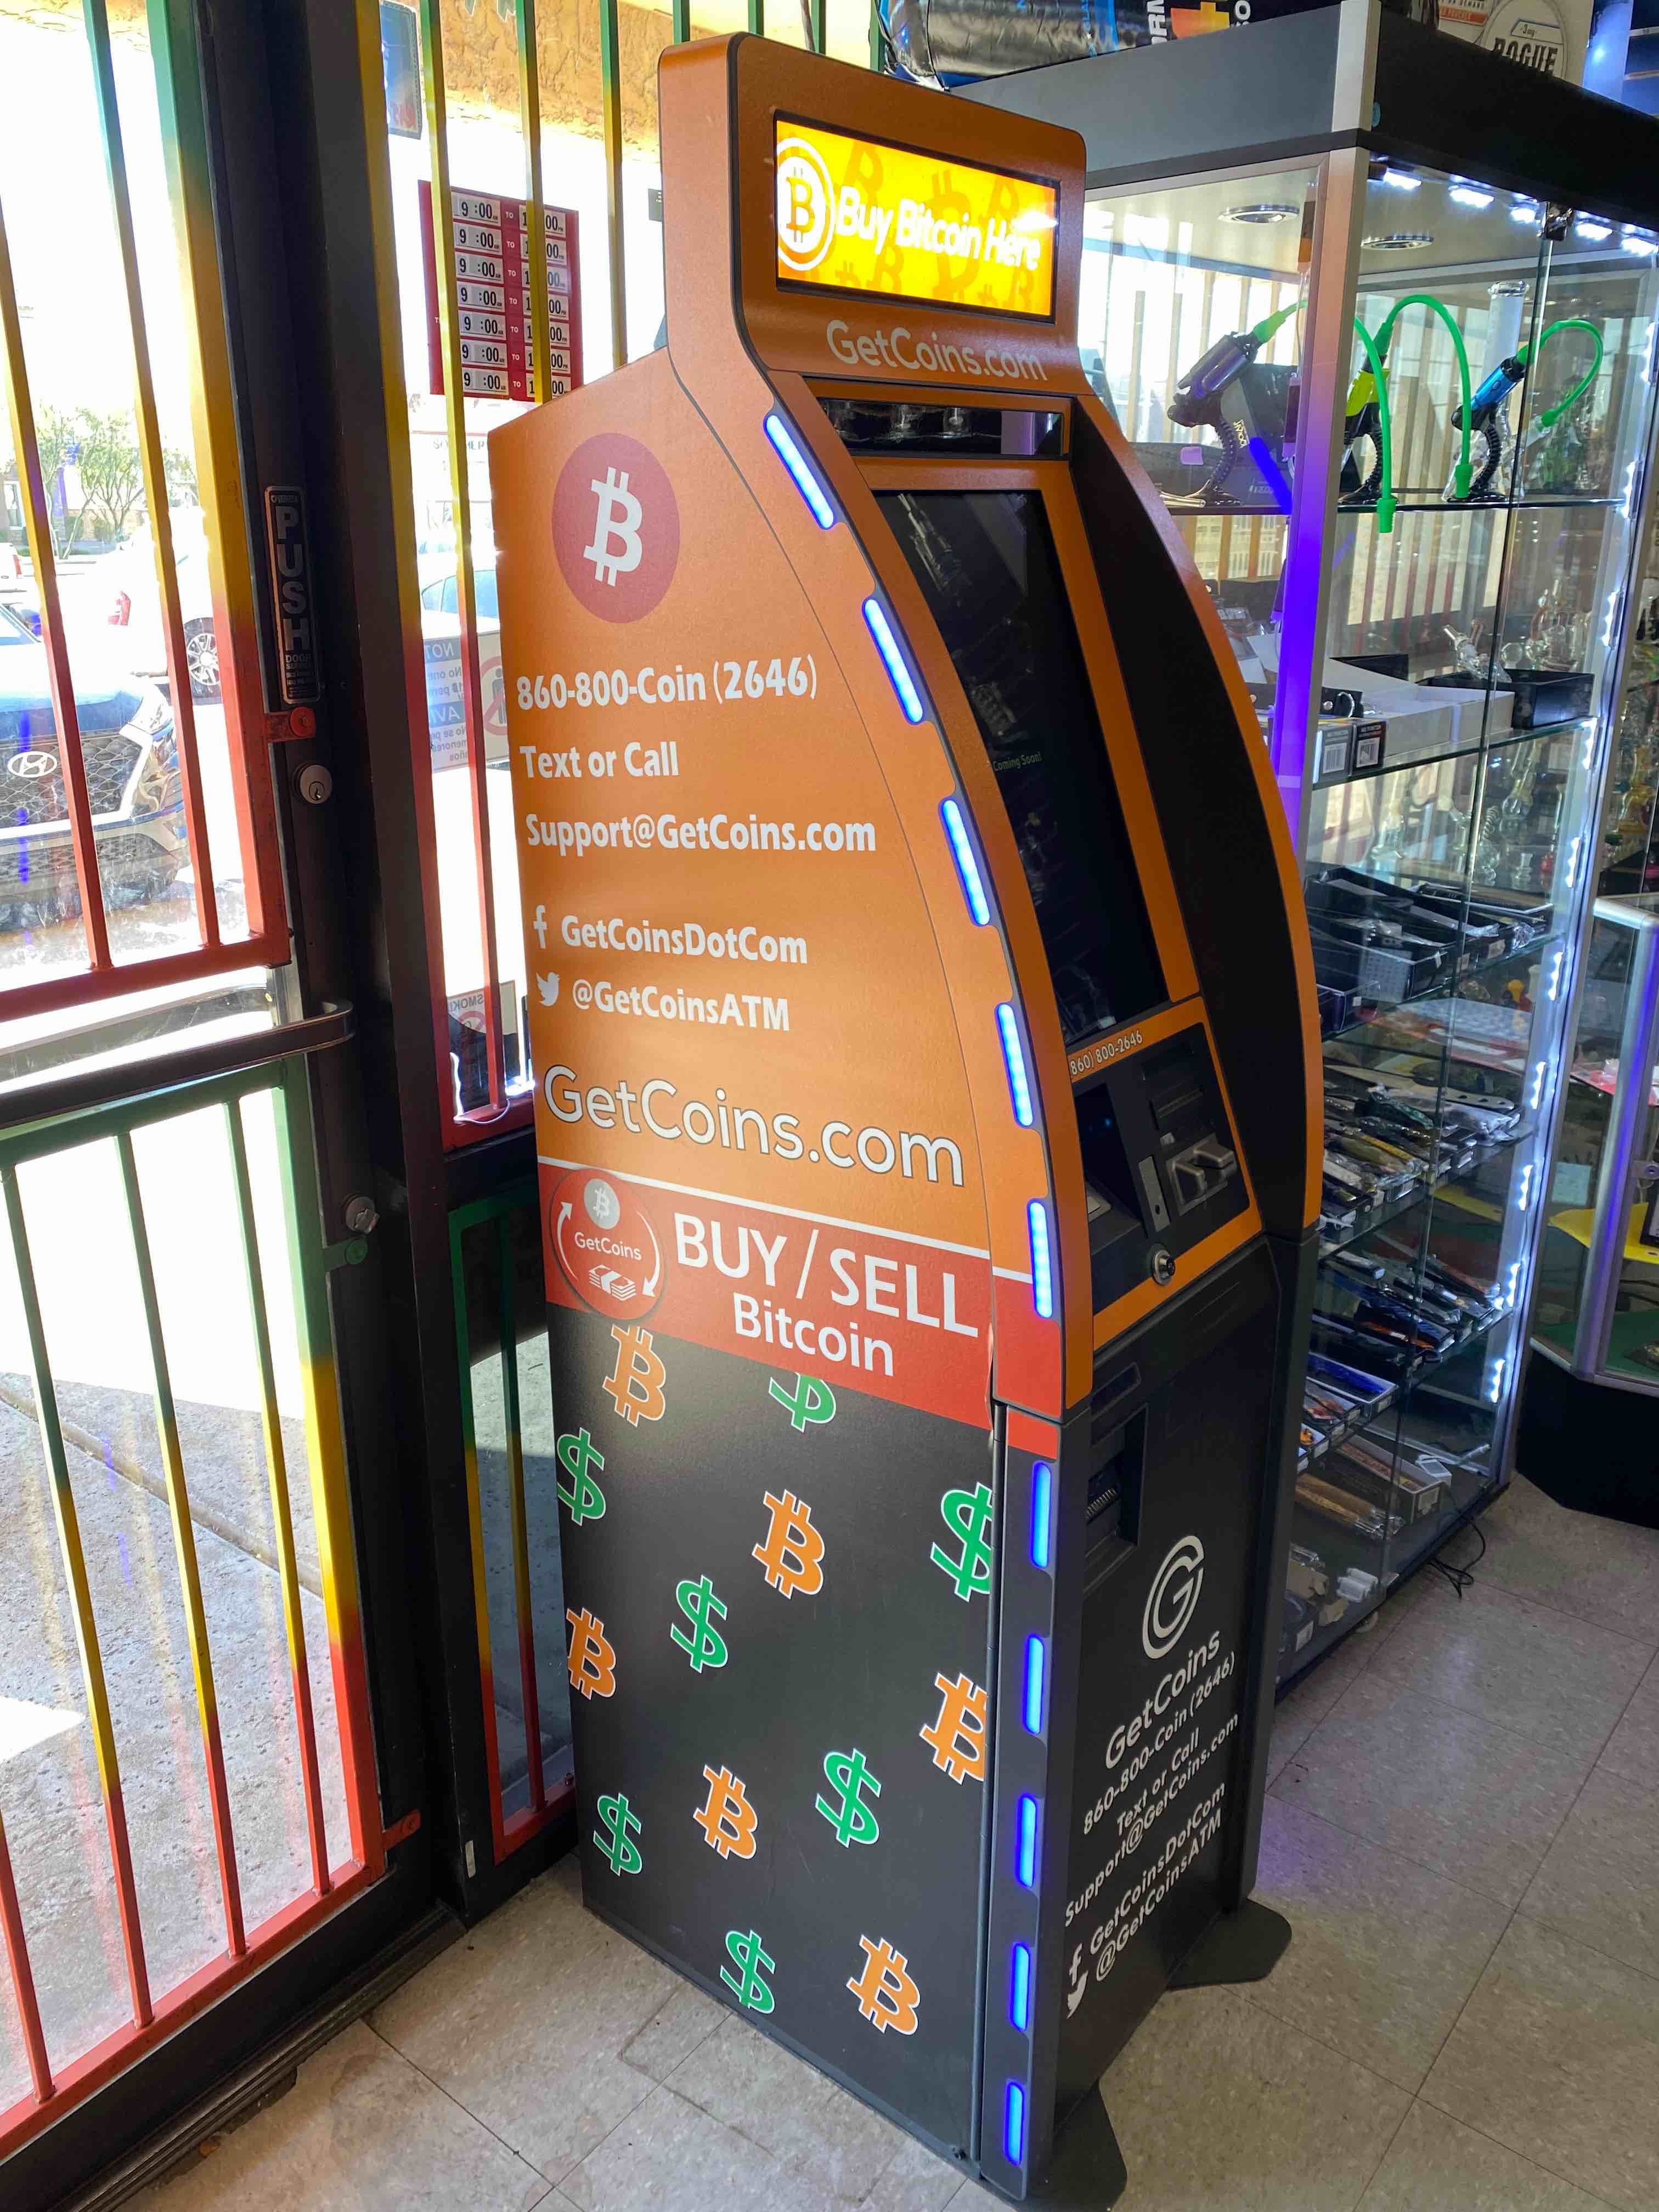 Getcoins - Bitcoin ATM - Inside of Elevated Smoke Shop in Mesa, Arizona